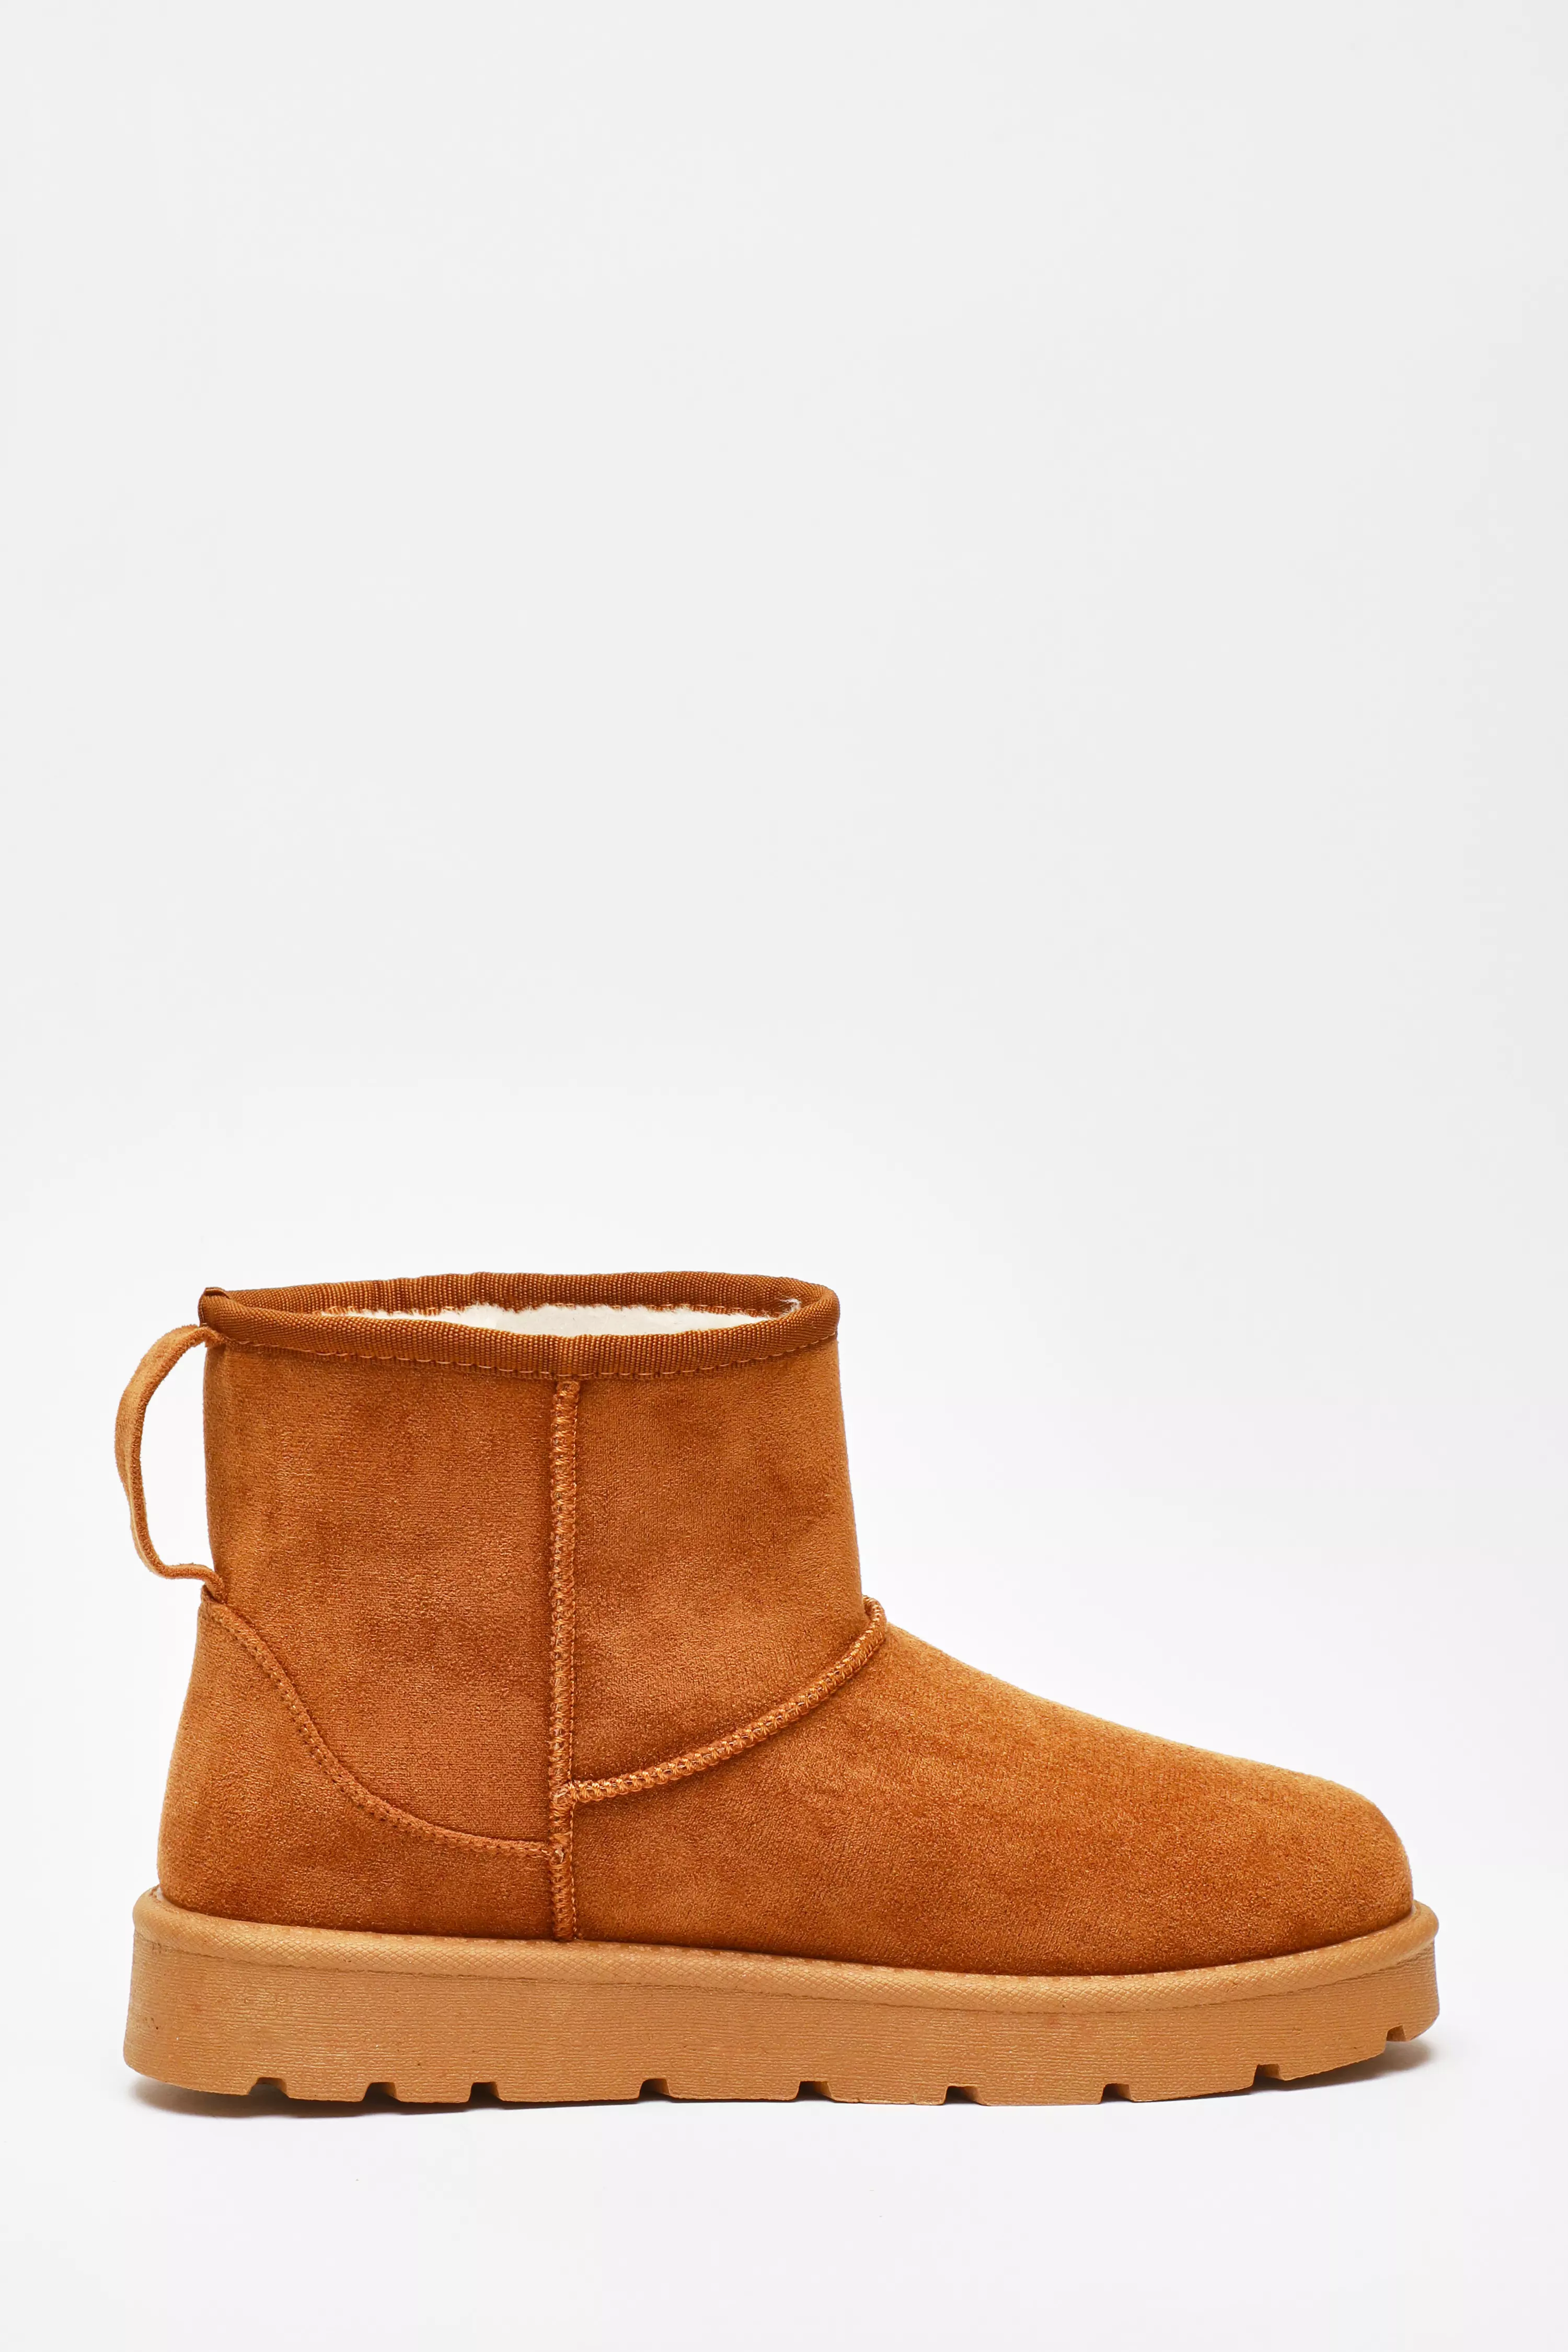 Tan Faux Suede Ankle Boots